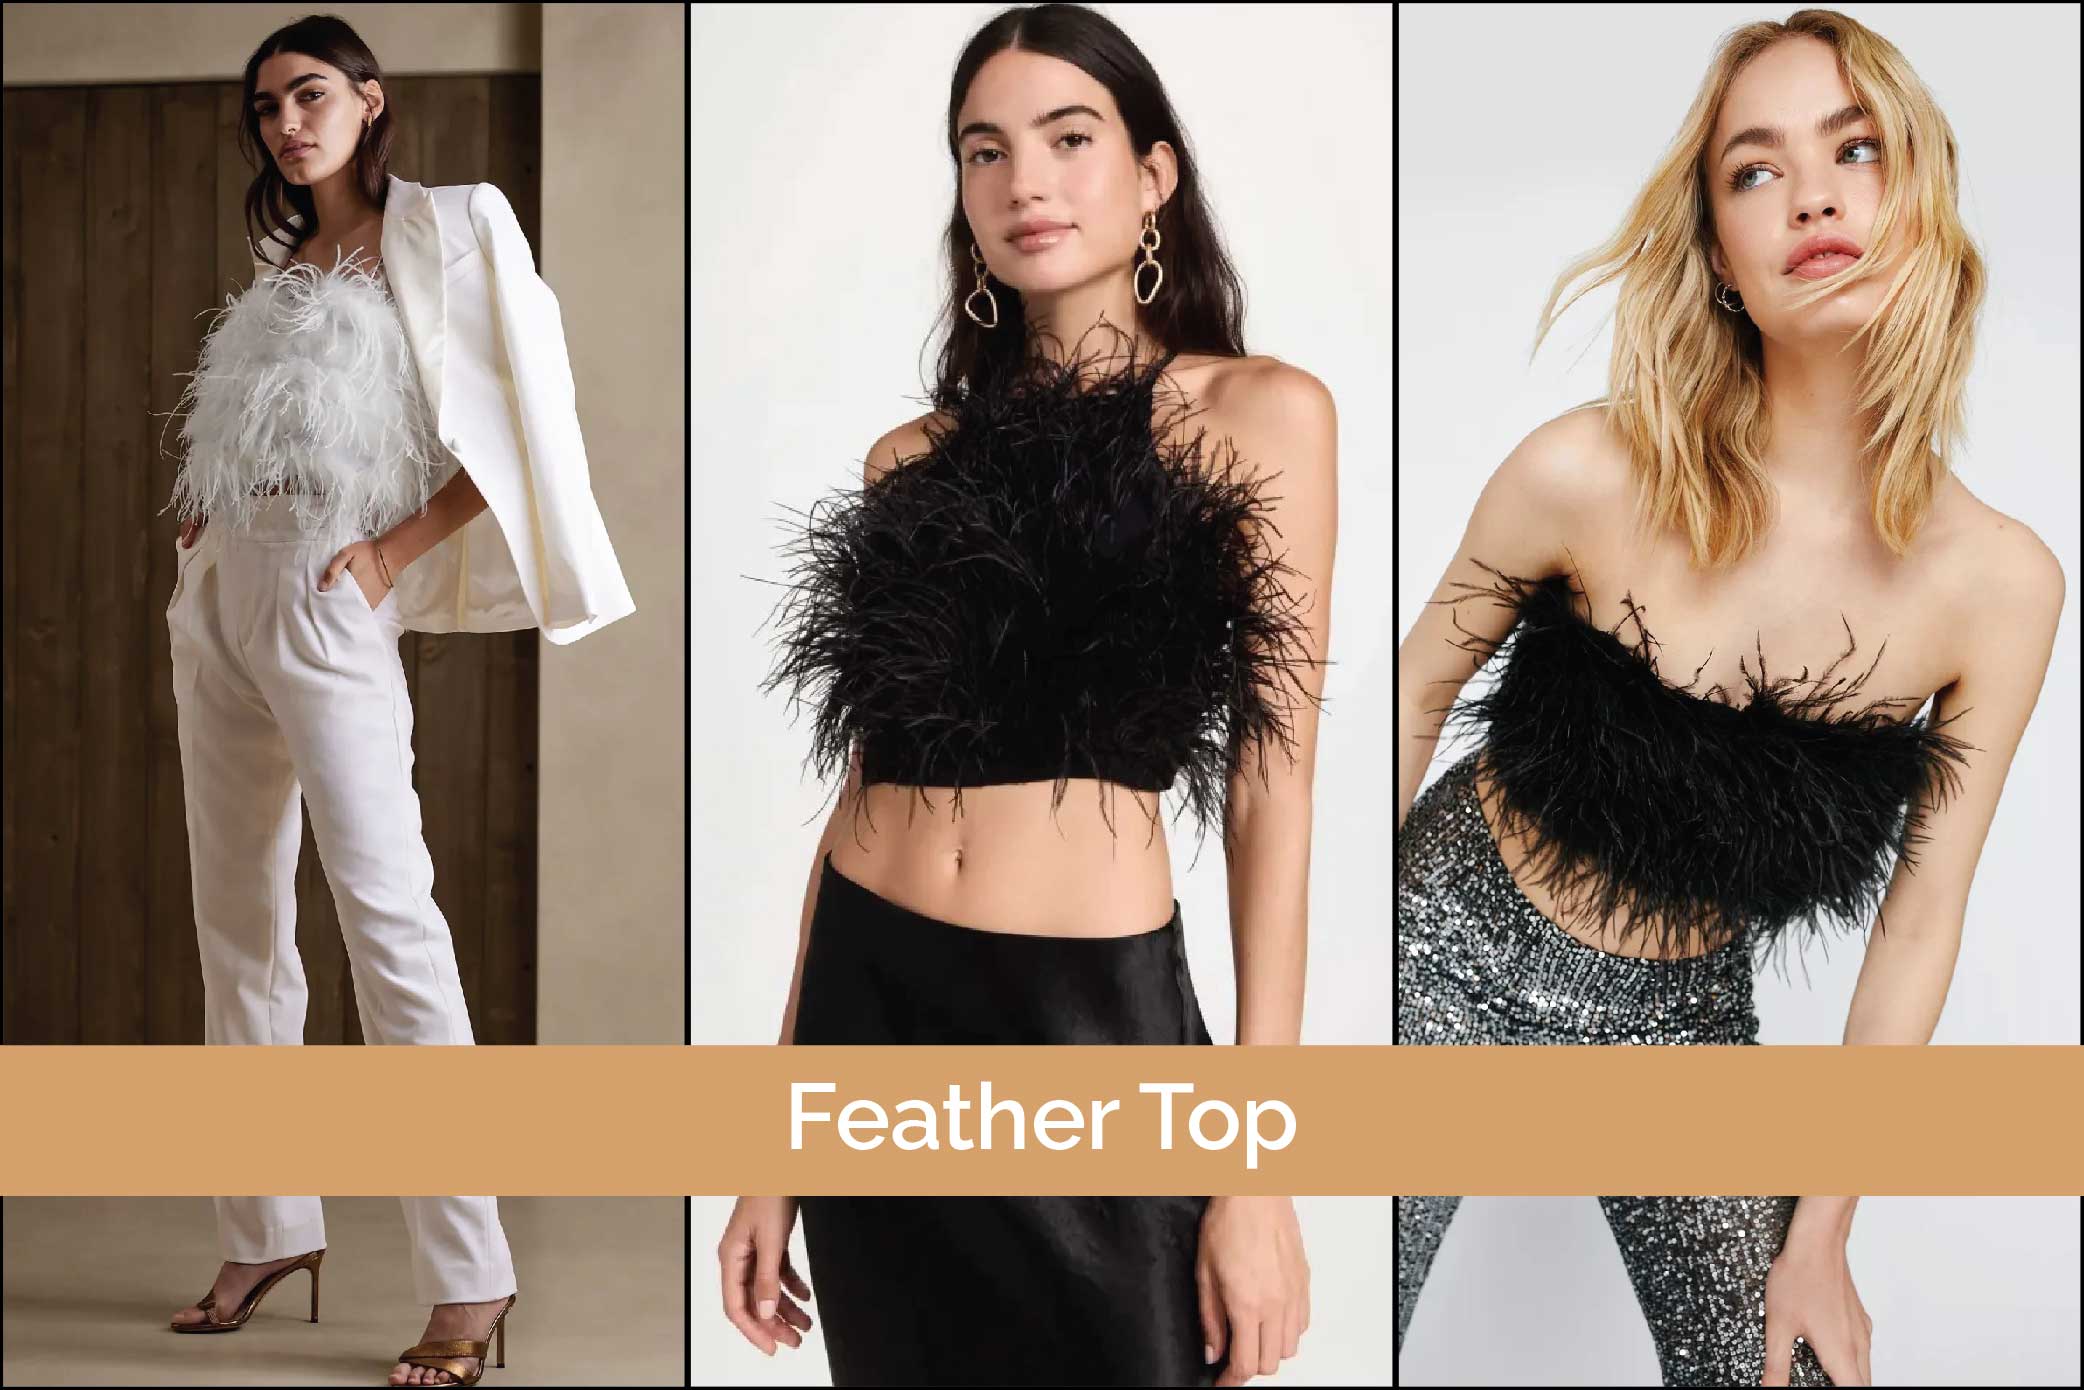 Feather Tops in Women's Fashion